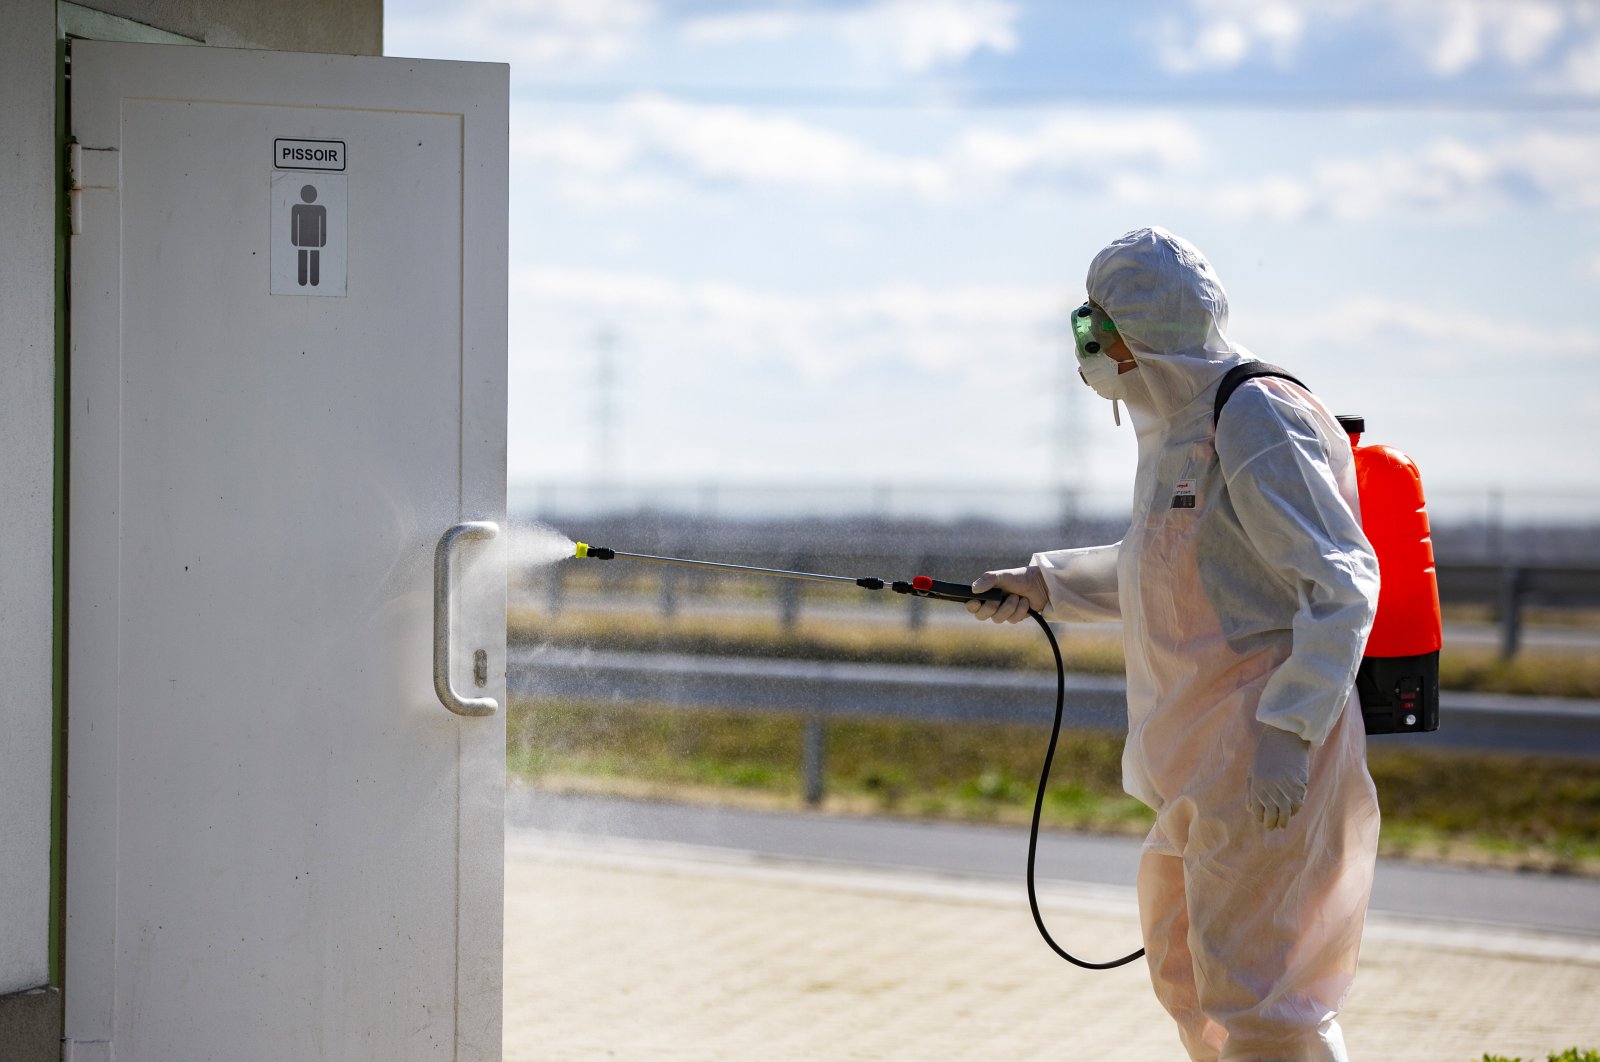 An employee of the national public road maintenance company sprays a public restroom door with disinfectant to prevent the spread of the new coronavirus at a rest area of the M70 motorway near Csornyefold, March 10, 2020. (AP Photo)